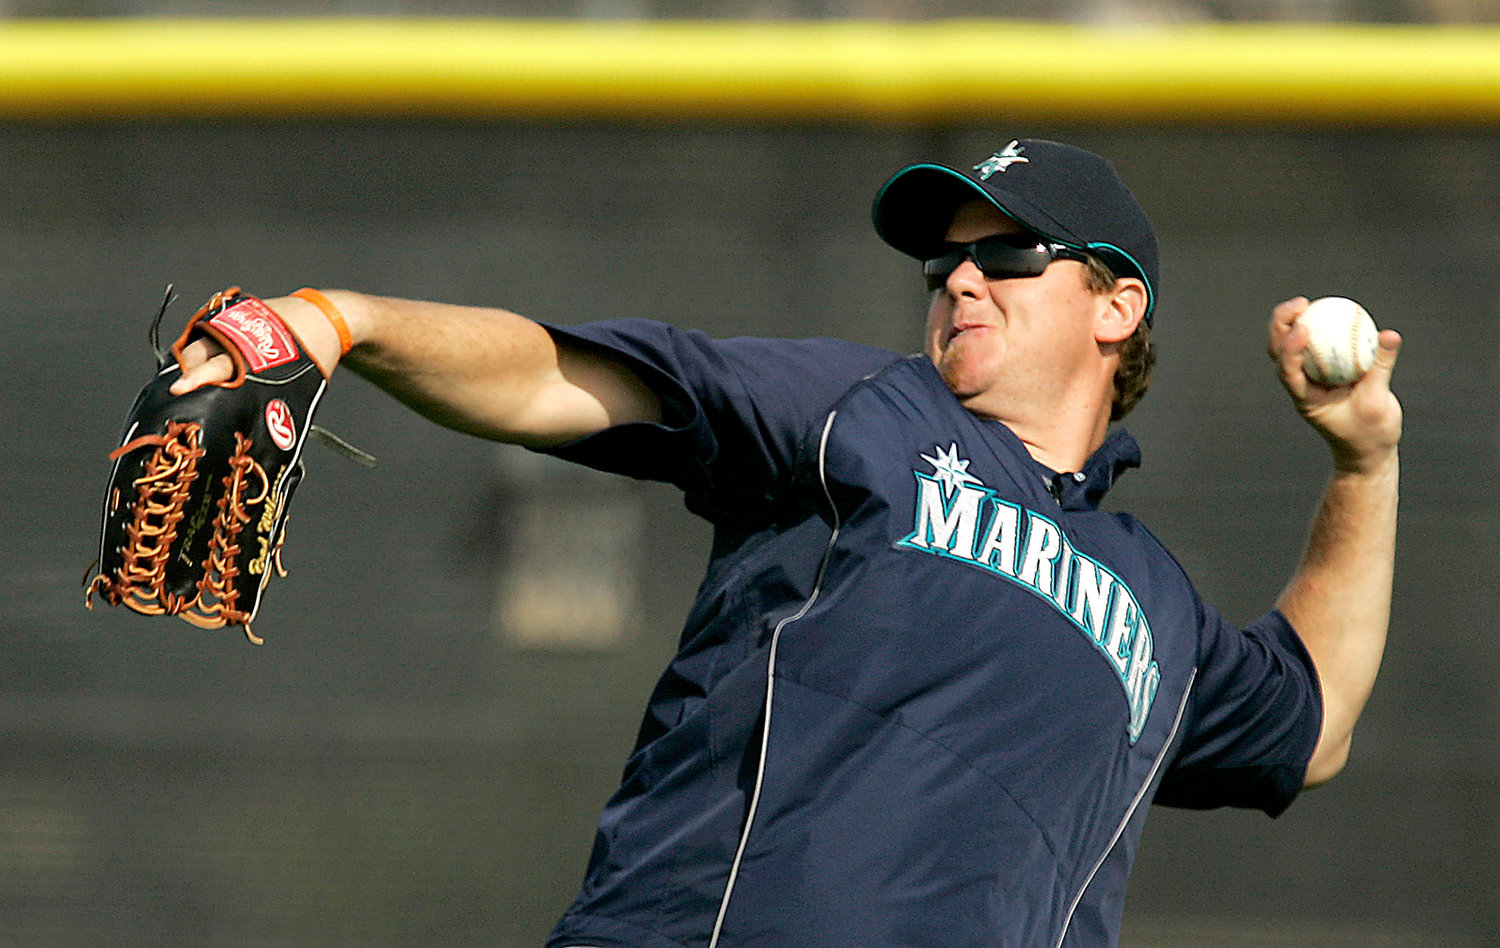 Seattle Mariners outfielder Brad Wilkerson throws the ball during spring training on Feb. 18, 2008, at the team's complex in Peoria, Ariz. Wilkerson was hired as the New York Yankees' assistant hitting coach on Monday.